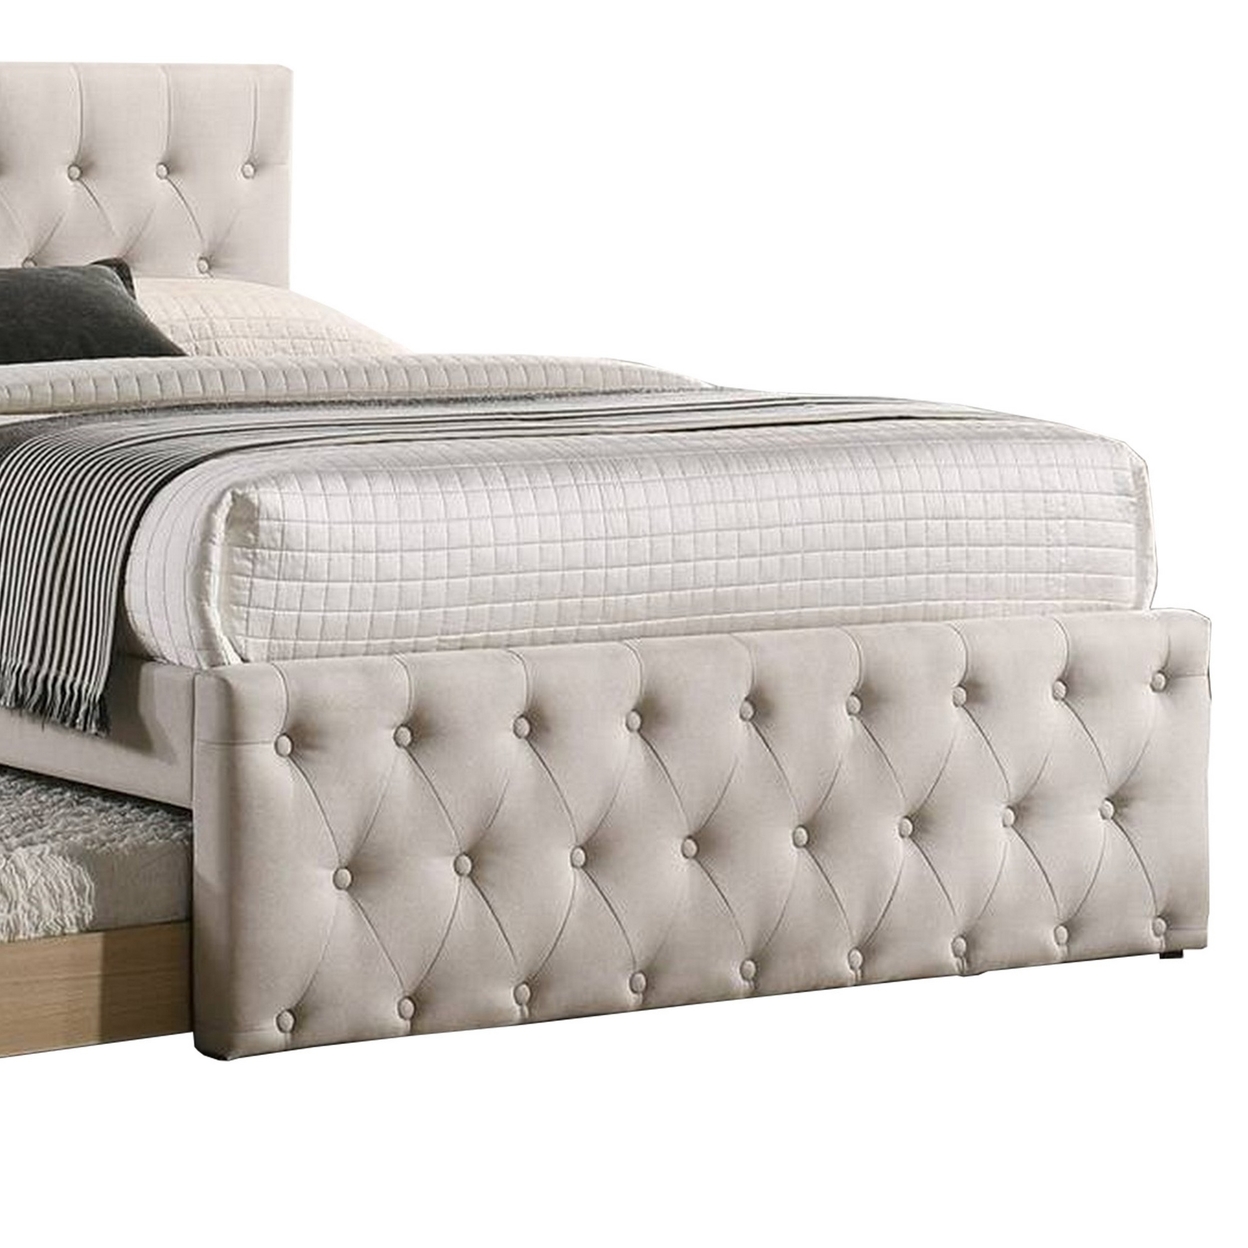 Nek Wood Twin Size Upholstered Bed With Trundle, Tufted, Taupe Burlap Frame- Saltoro Sherpi